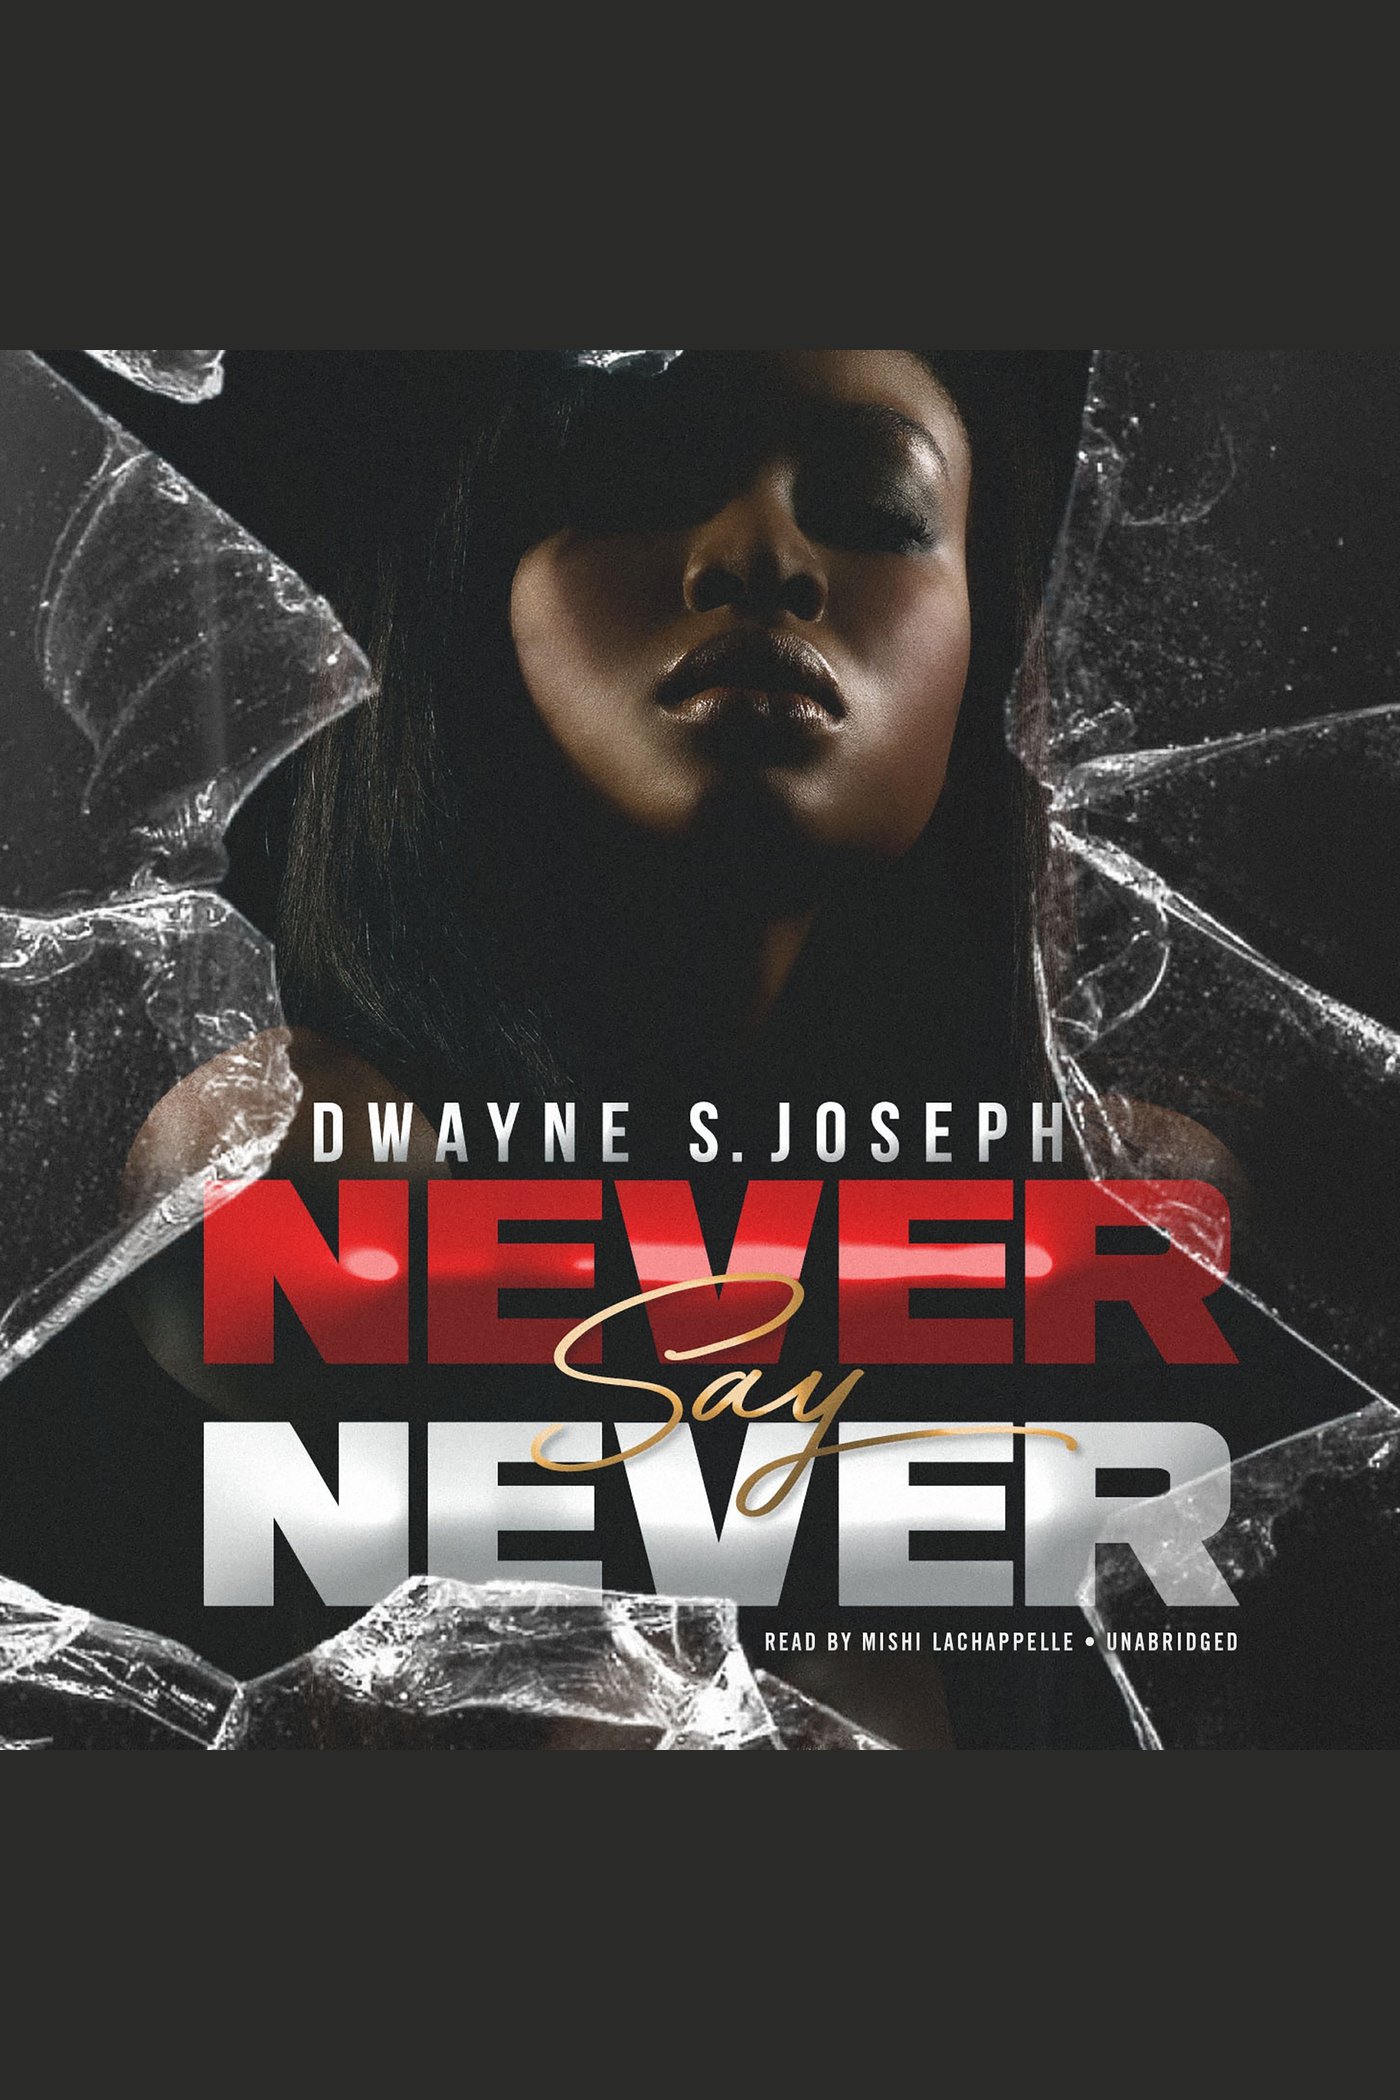 Never Say Never cover image